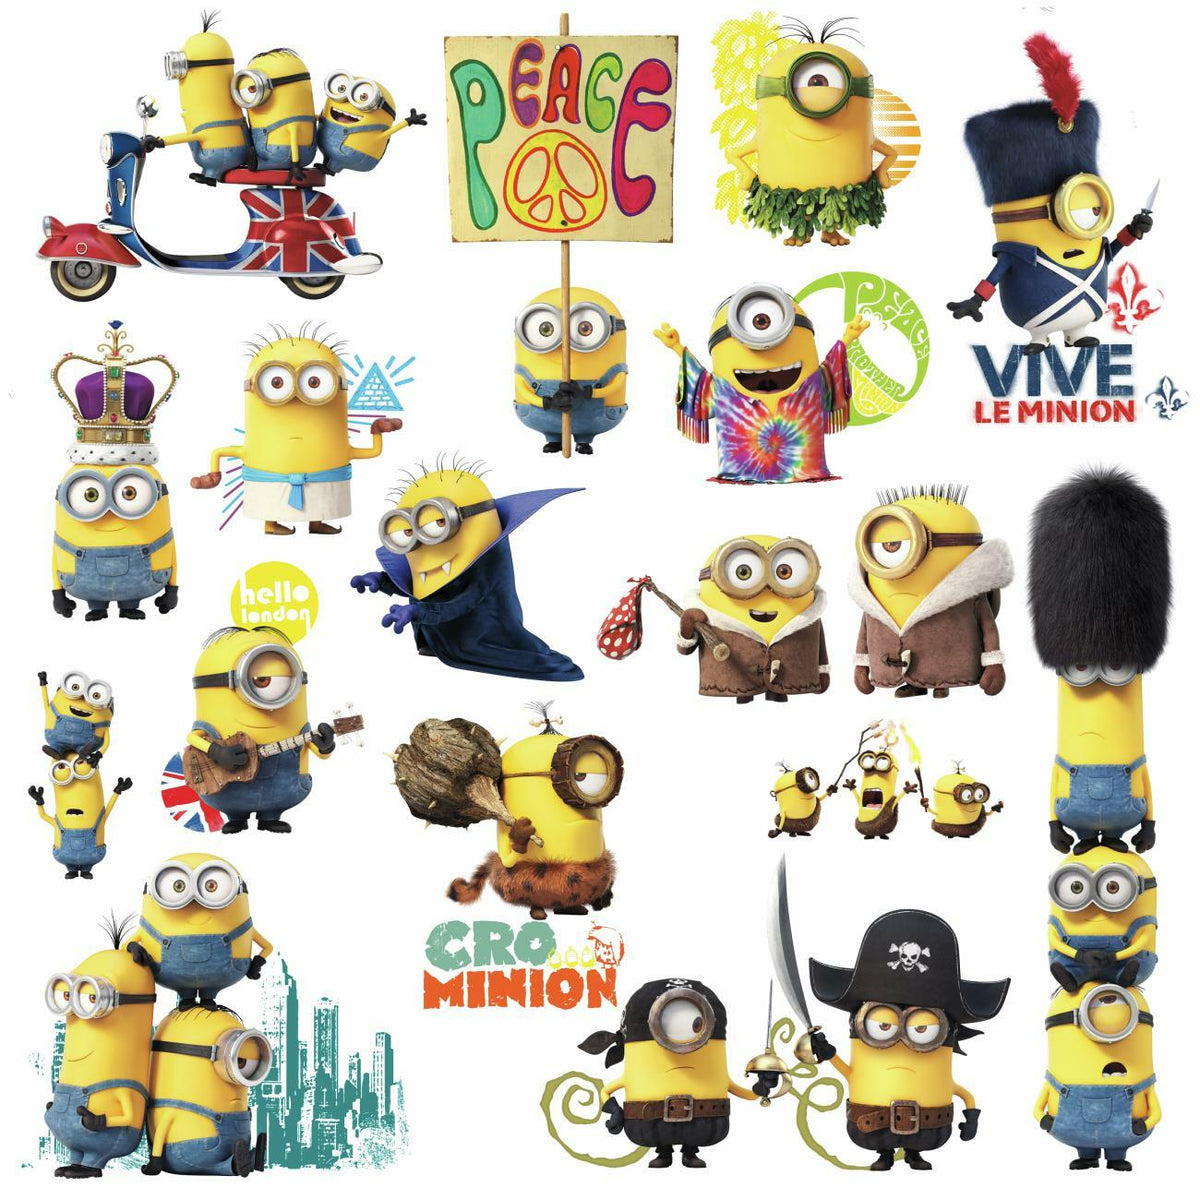 Details about   Minions the minions me mechant/wall sticker wall deco show original title